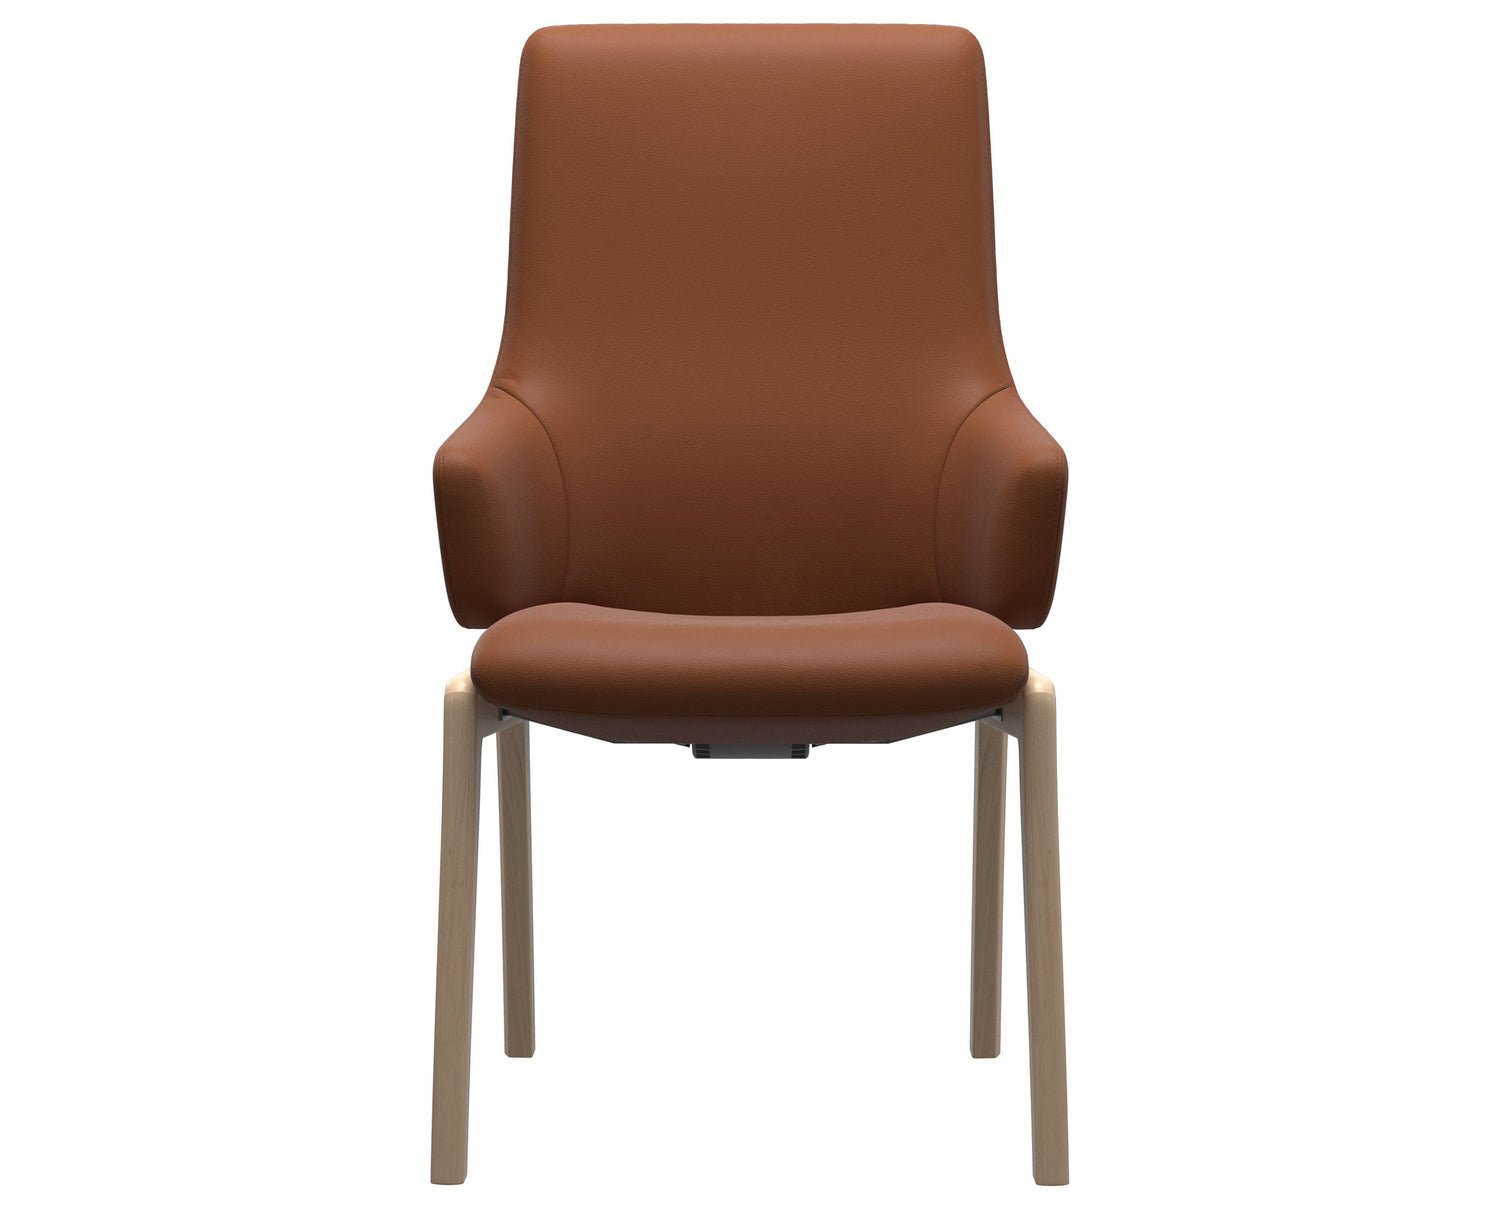 Paloma Leather New Cognac & Natural Base | Stressless Laurel High Back D100 Dining Chair w/Arms | Valley Ridge Furniture